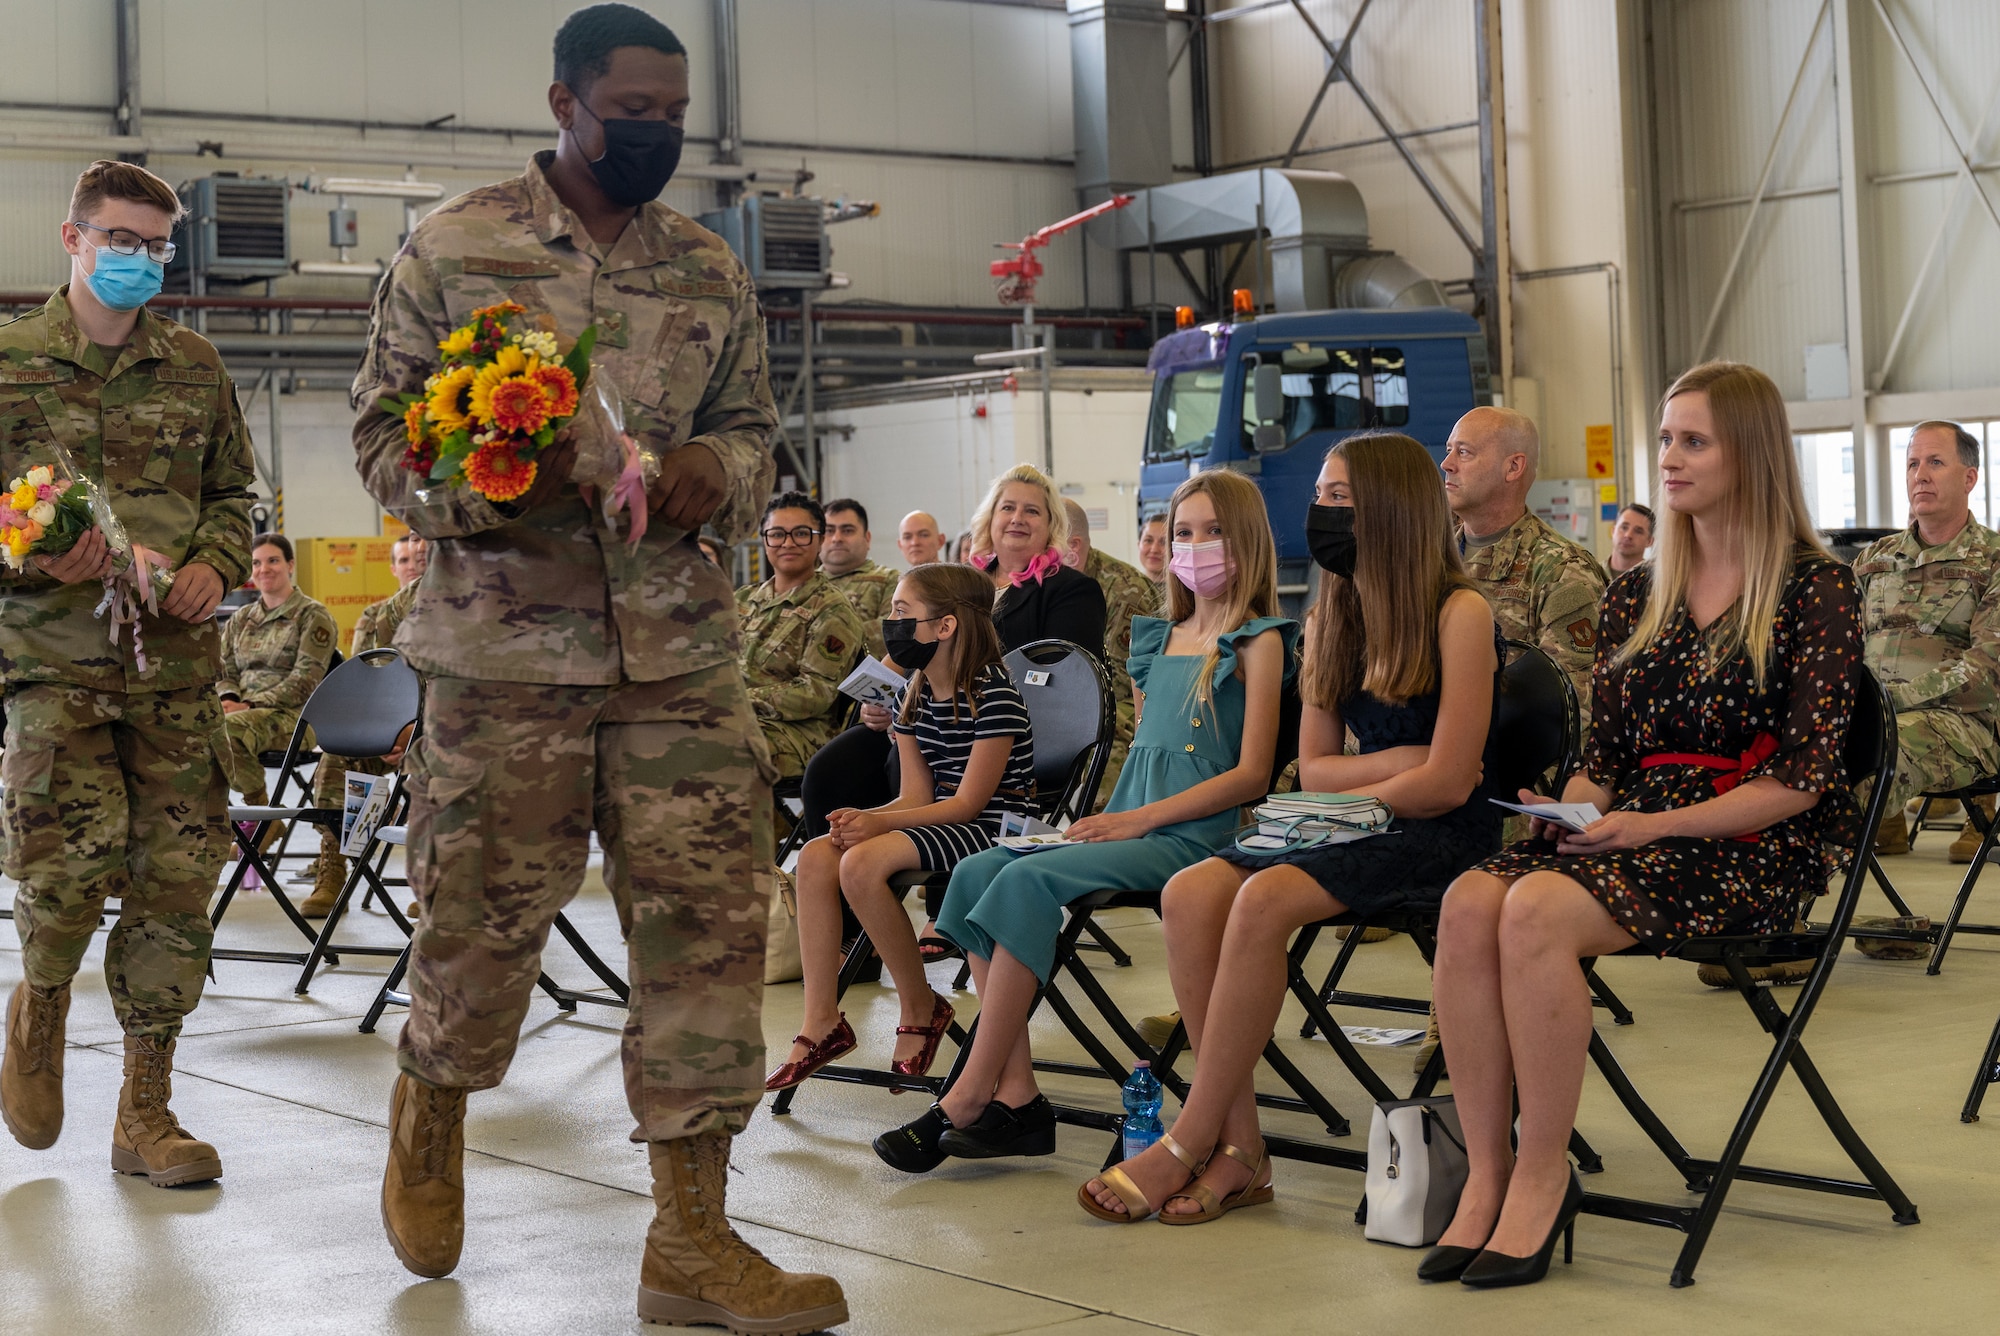 Airmen holding flowers and walking alongside seated crowd.